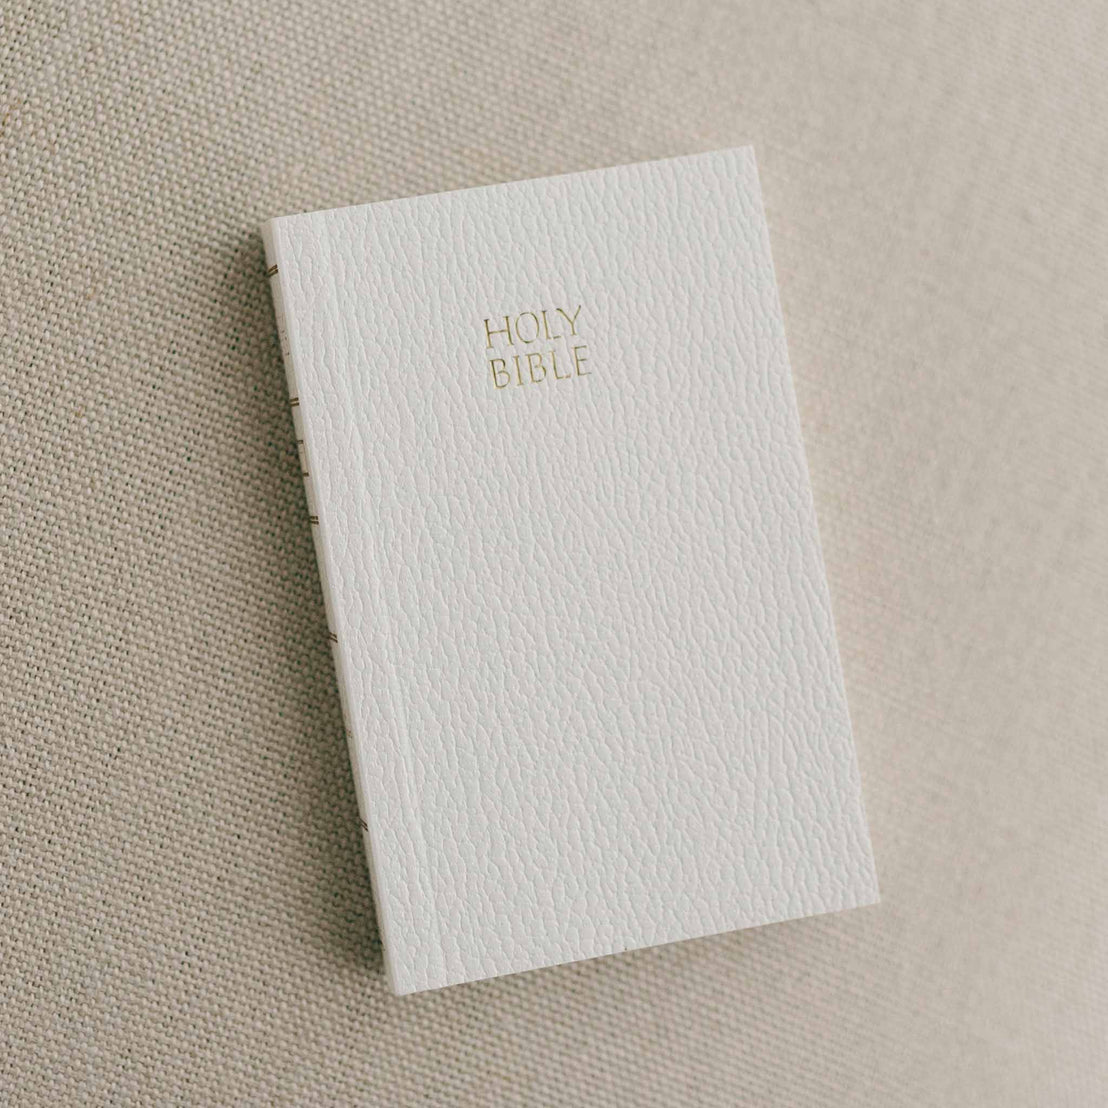 Pocket size bible for baby